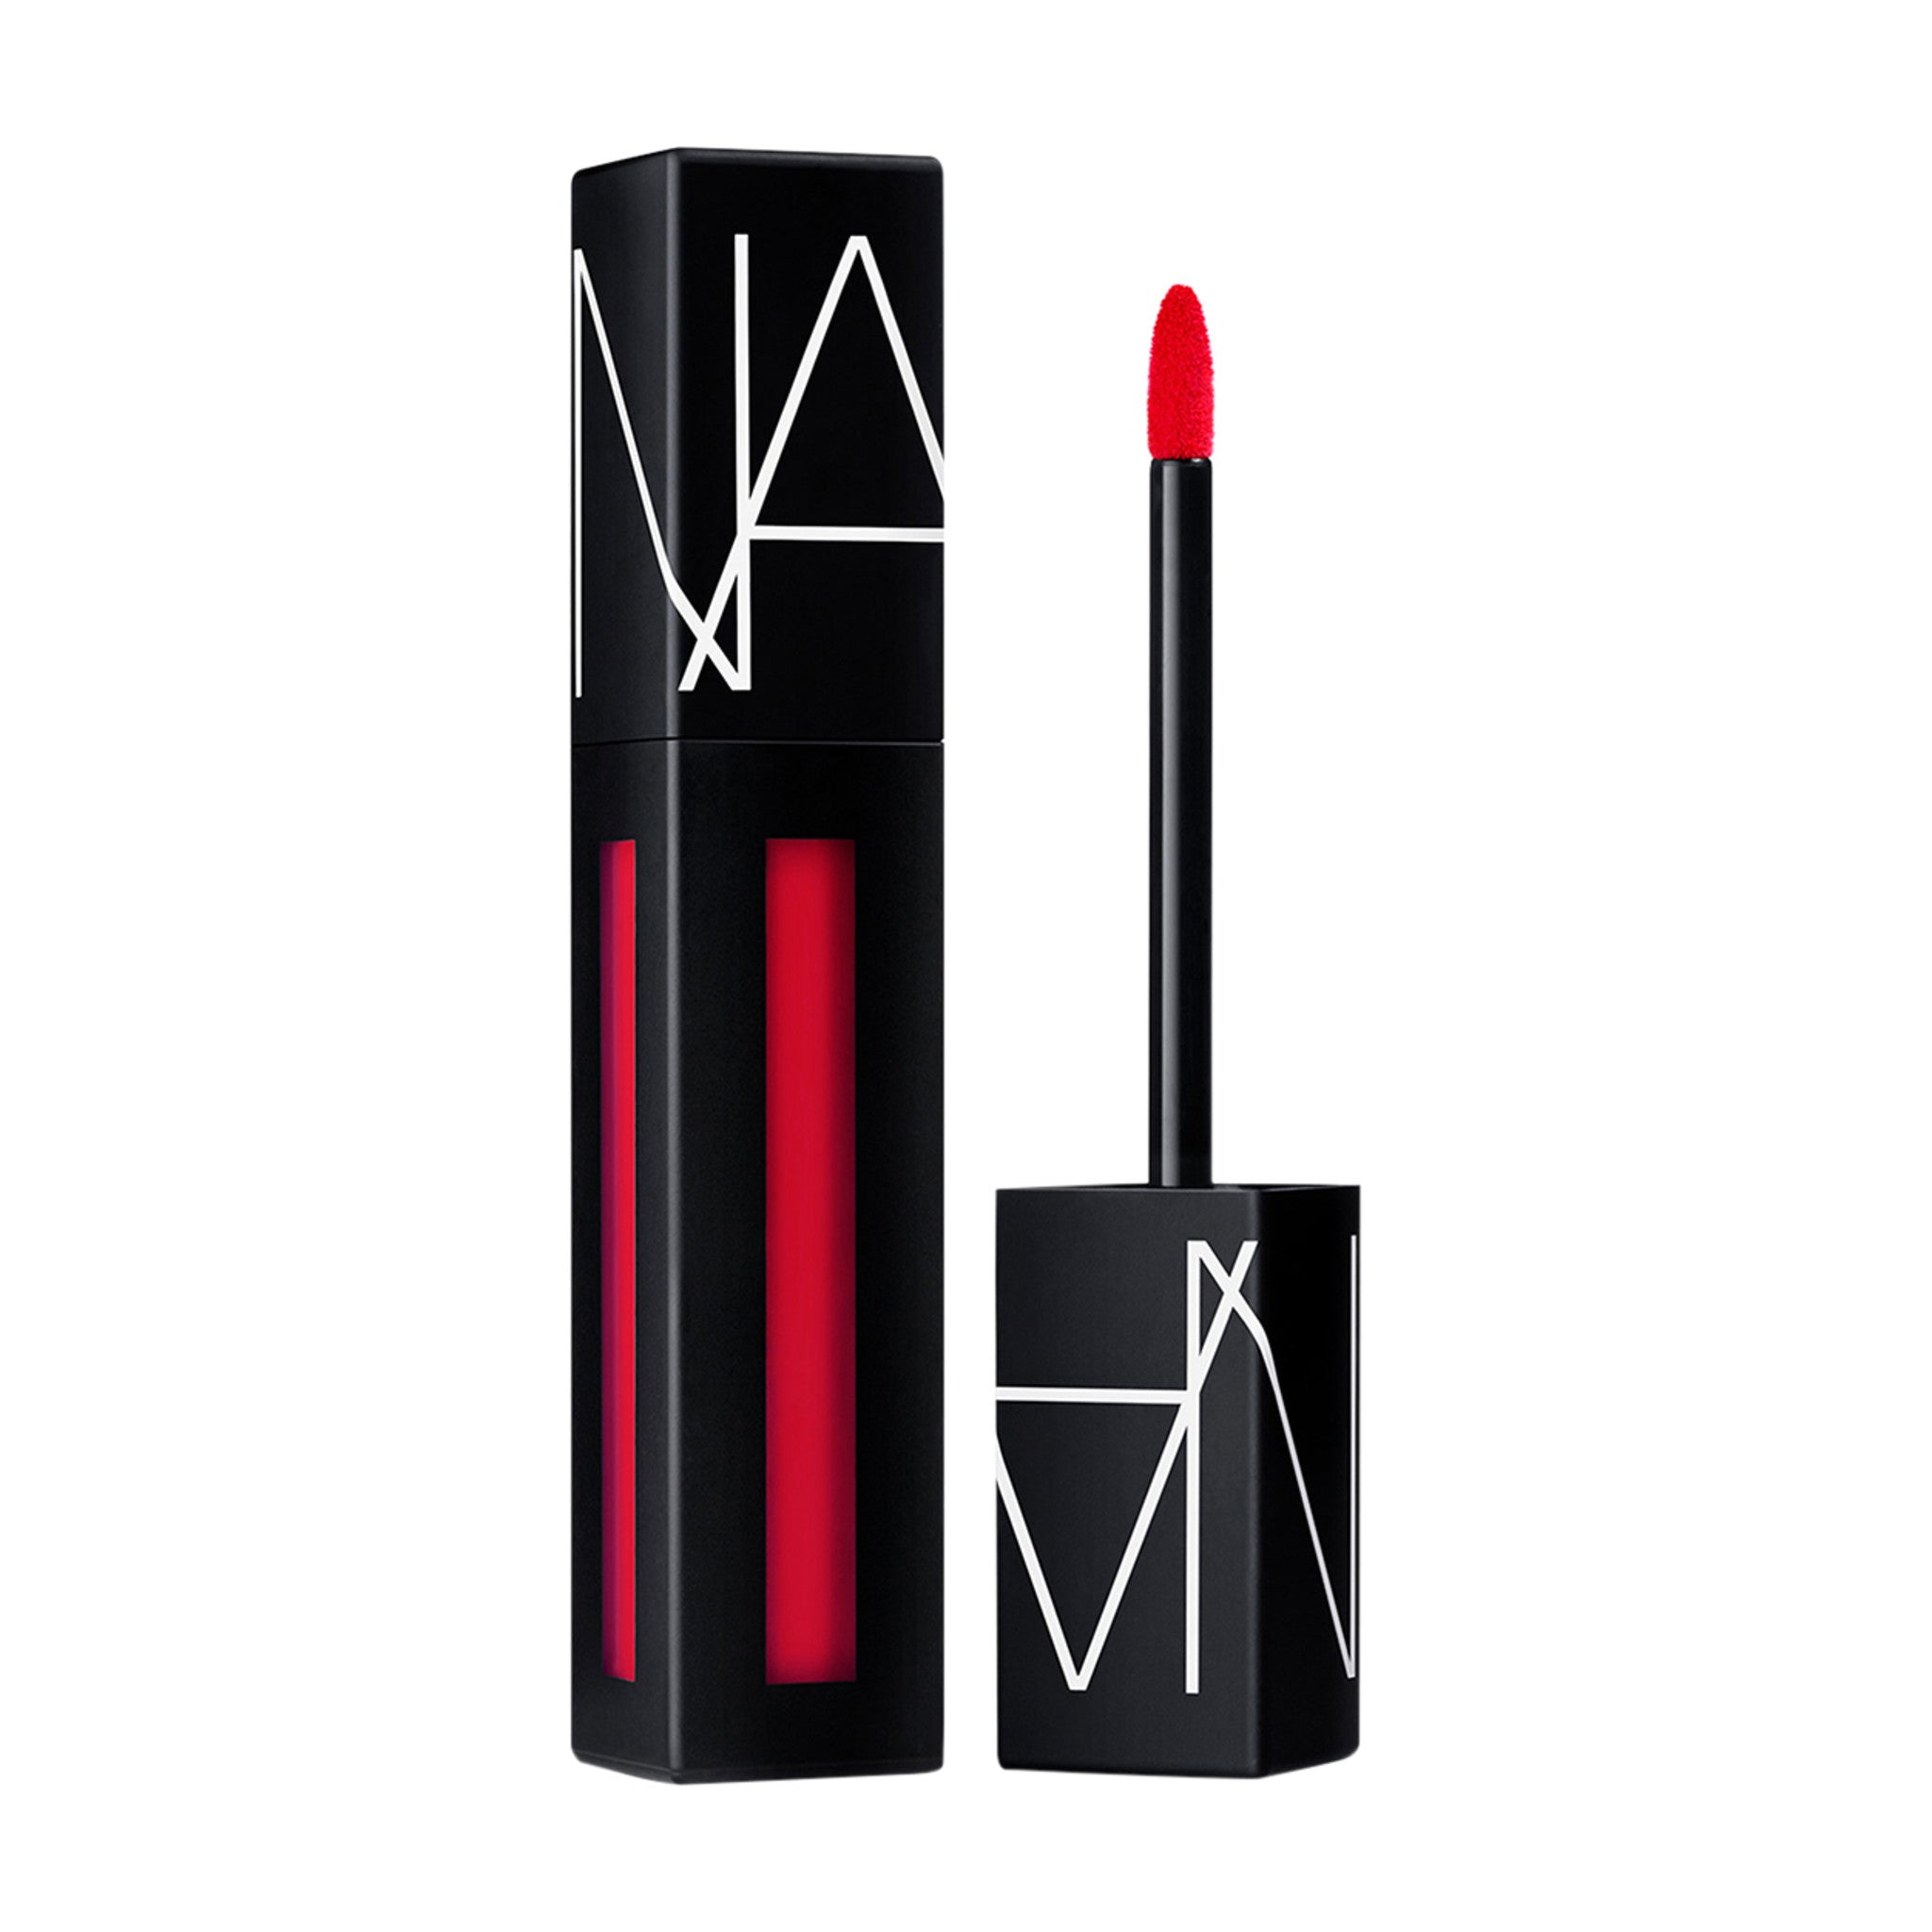 Nars Powermatte Lip Pigment Color/Shade variant: Light My Fire (Vivid Orange Red) main image. This product is in the color red